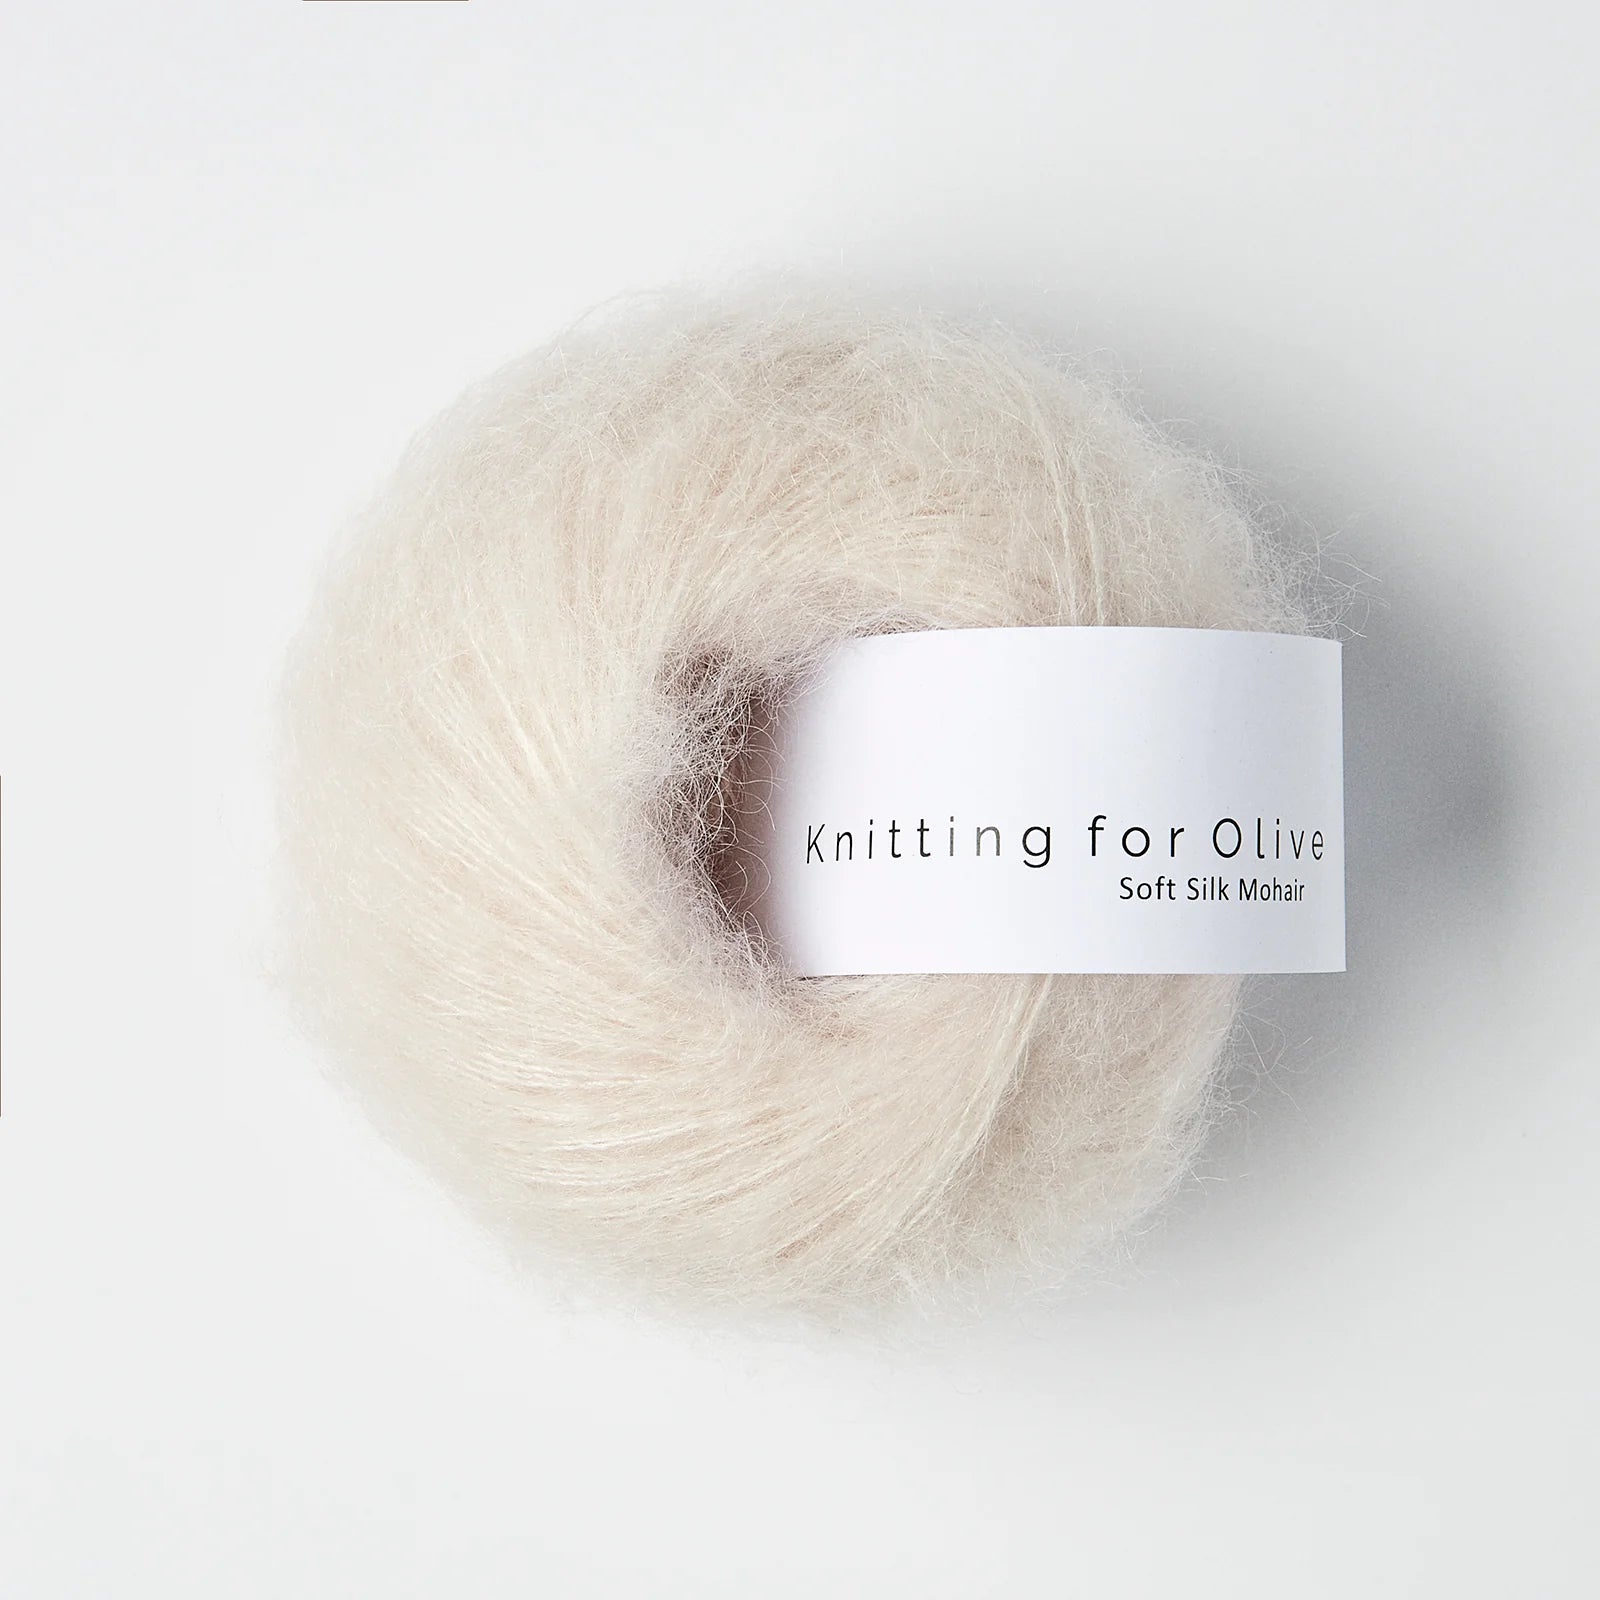 Knitting for Olive Soft Silk Mohair - Knitting for Olive - Putty - The Little Yarn Store